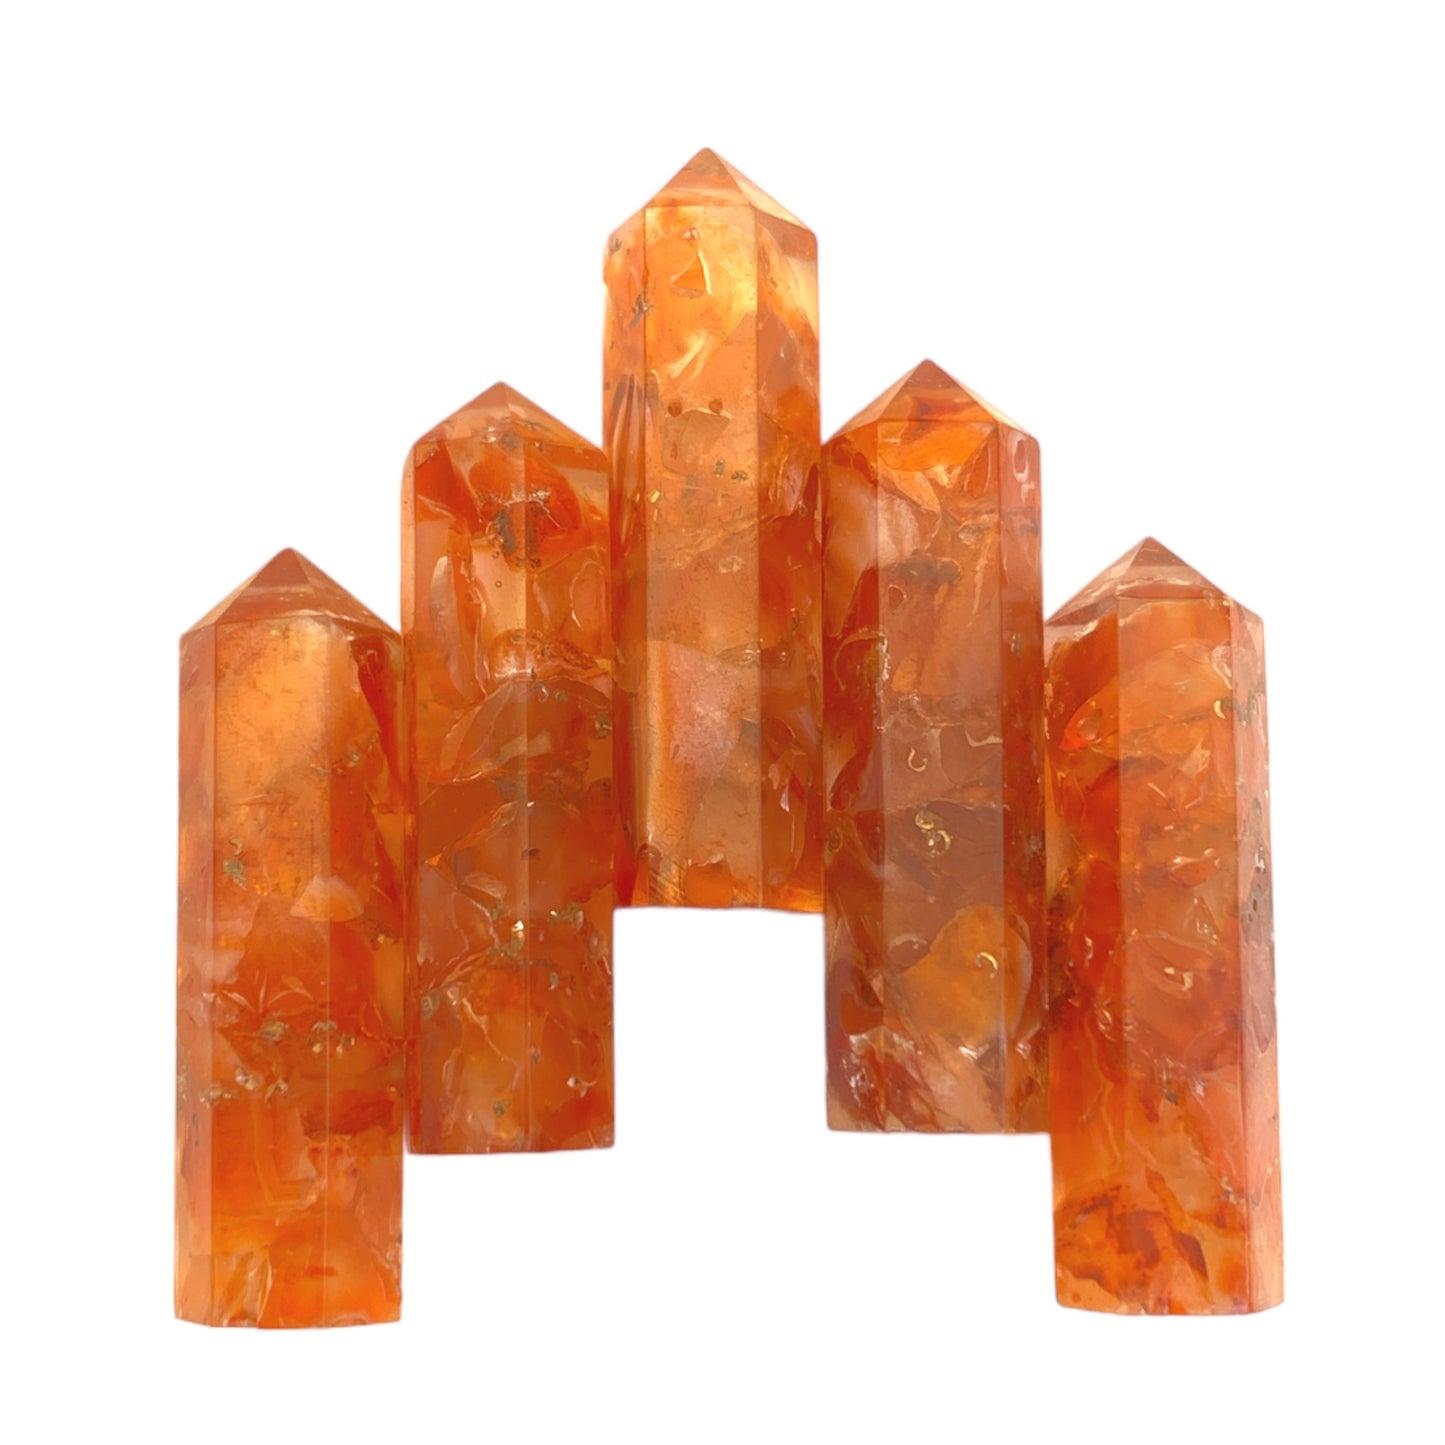 Carnelian Orgonite - 35-40mm - Single Terminated Pencil Points - (retail purchase as singles, wholesale min order 5) - NEW522 - India